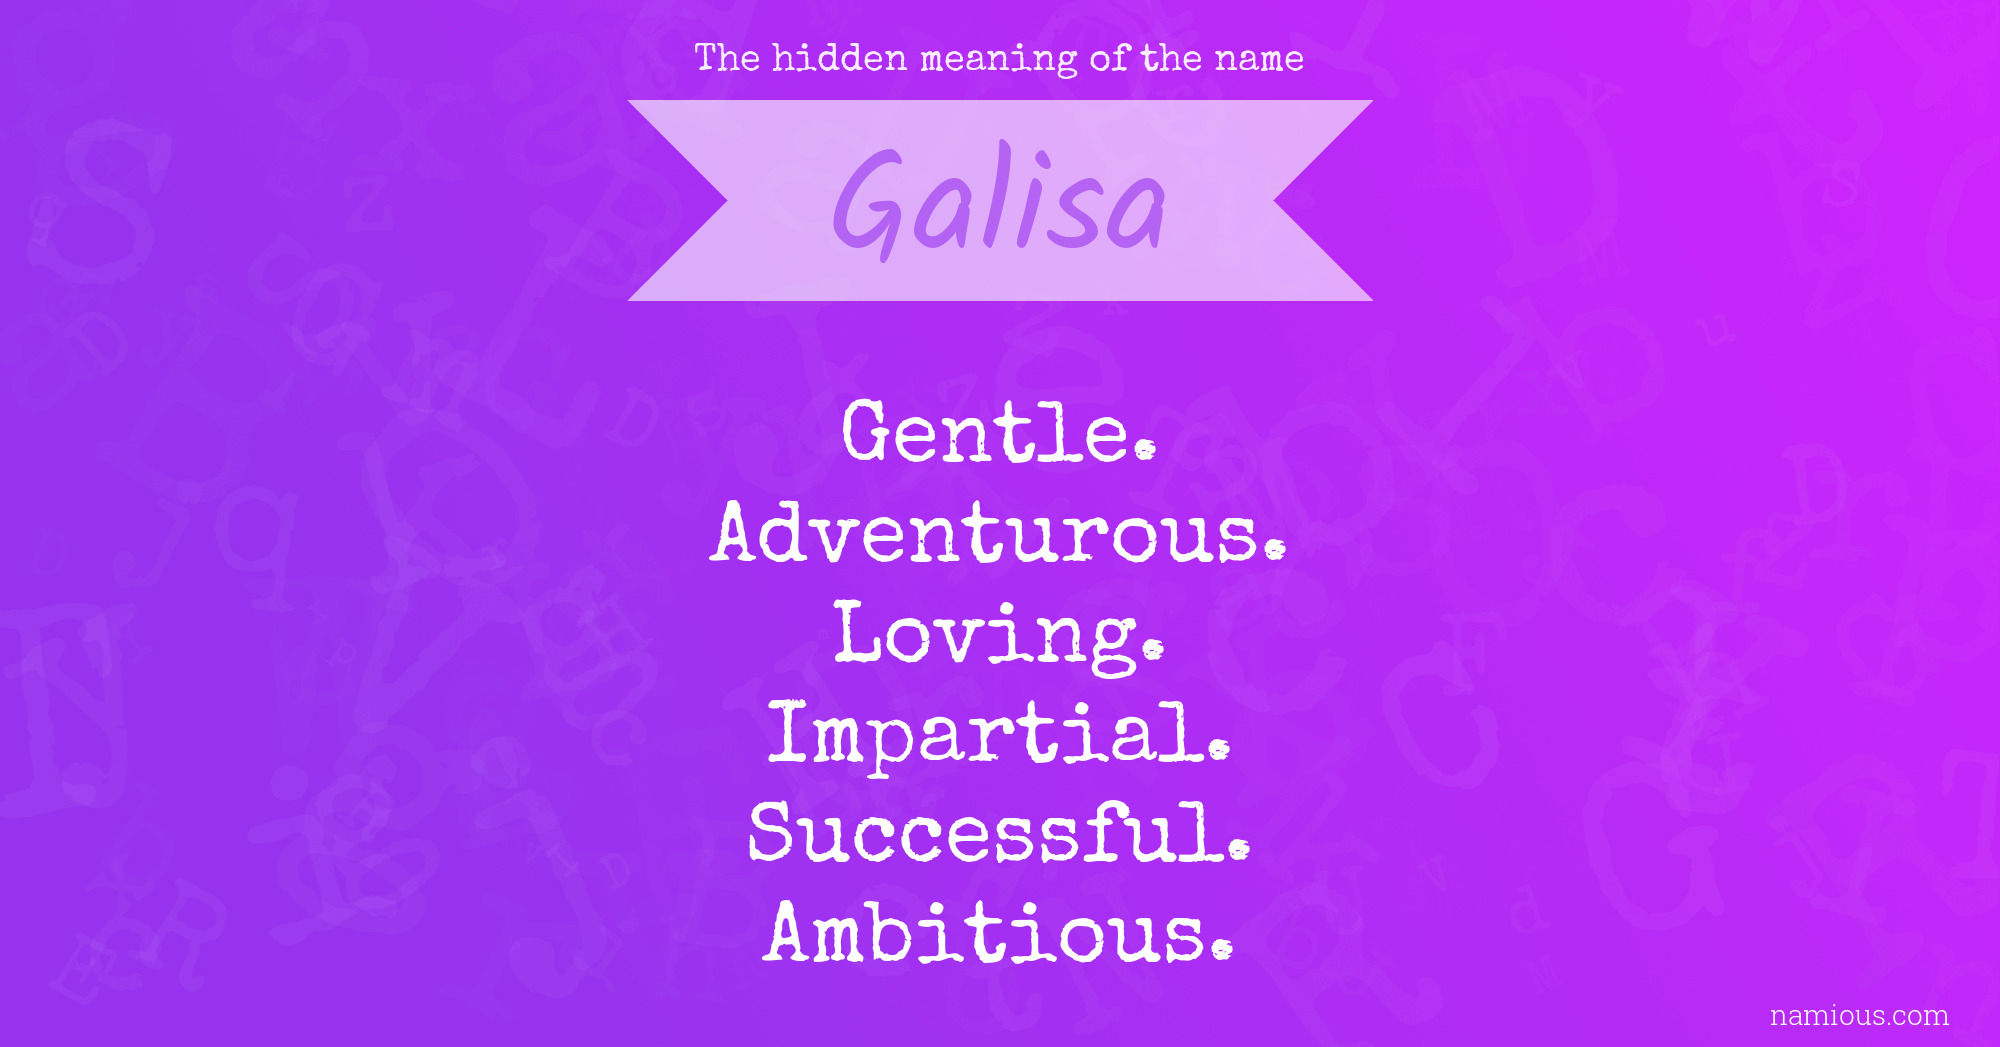 The hidden meaning of the name Galisa